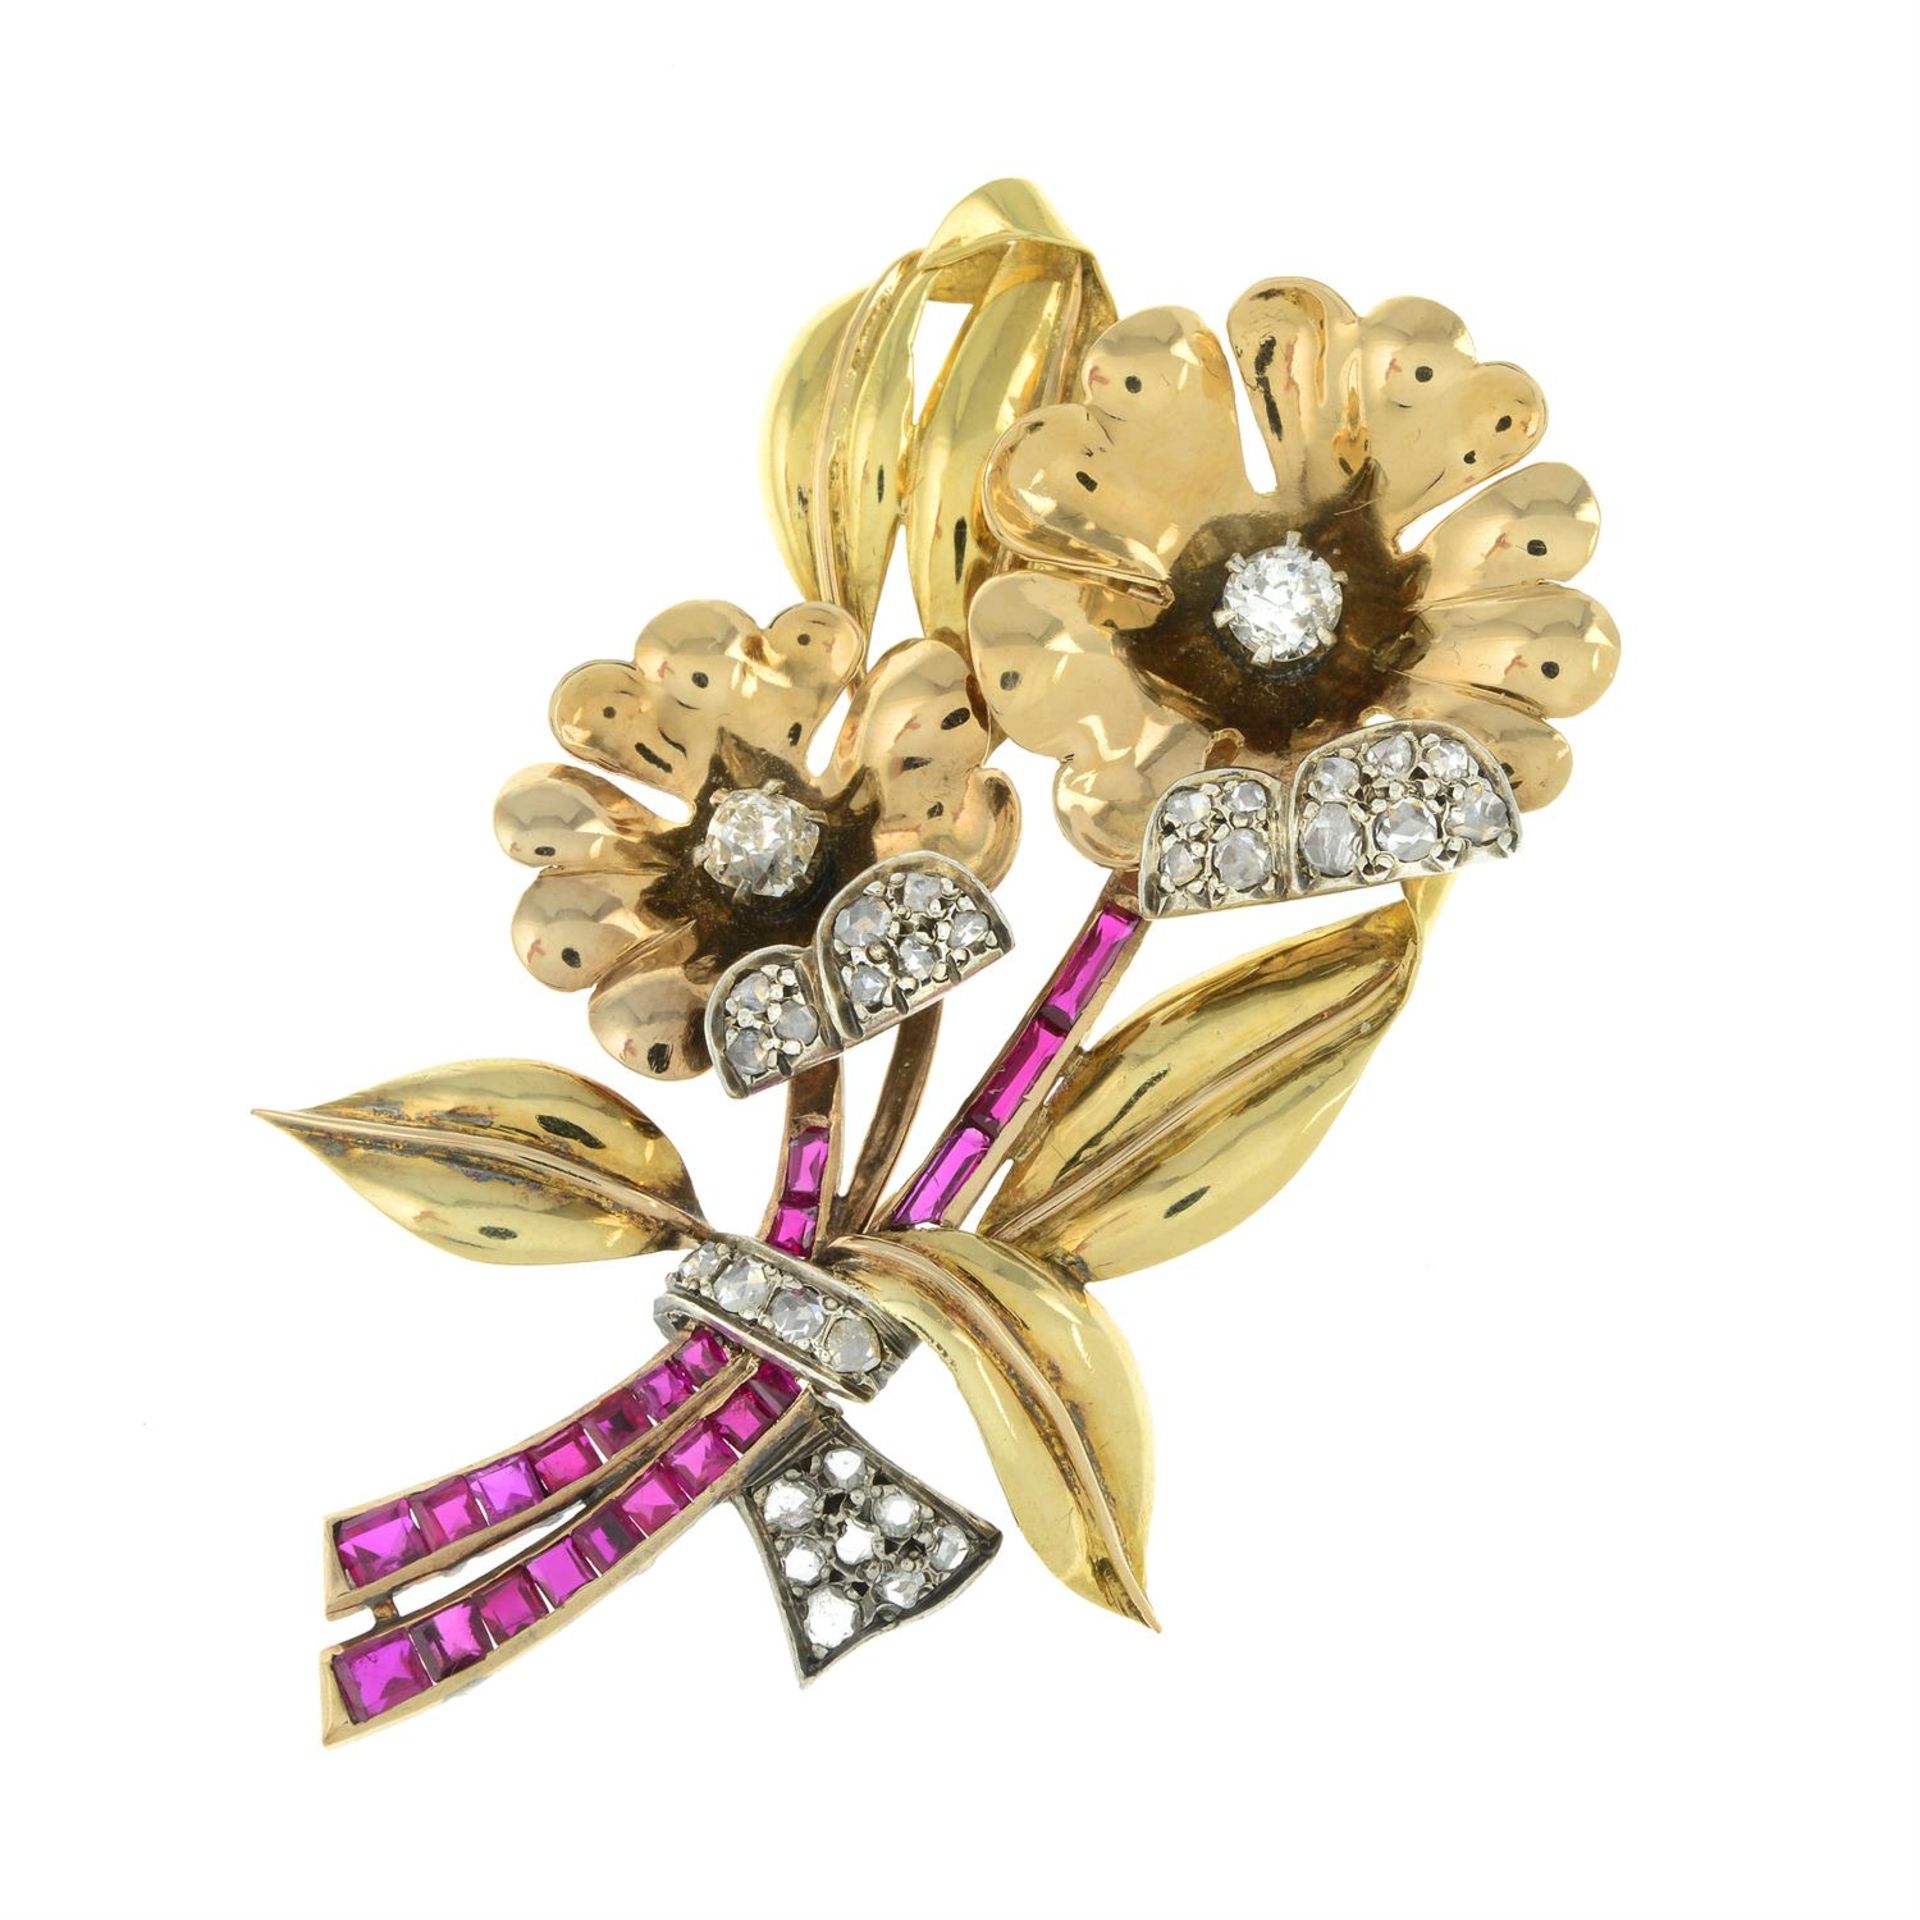 Retro gold, diamond and ruby flower brooch - Image 2 of 3